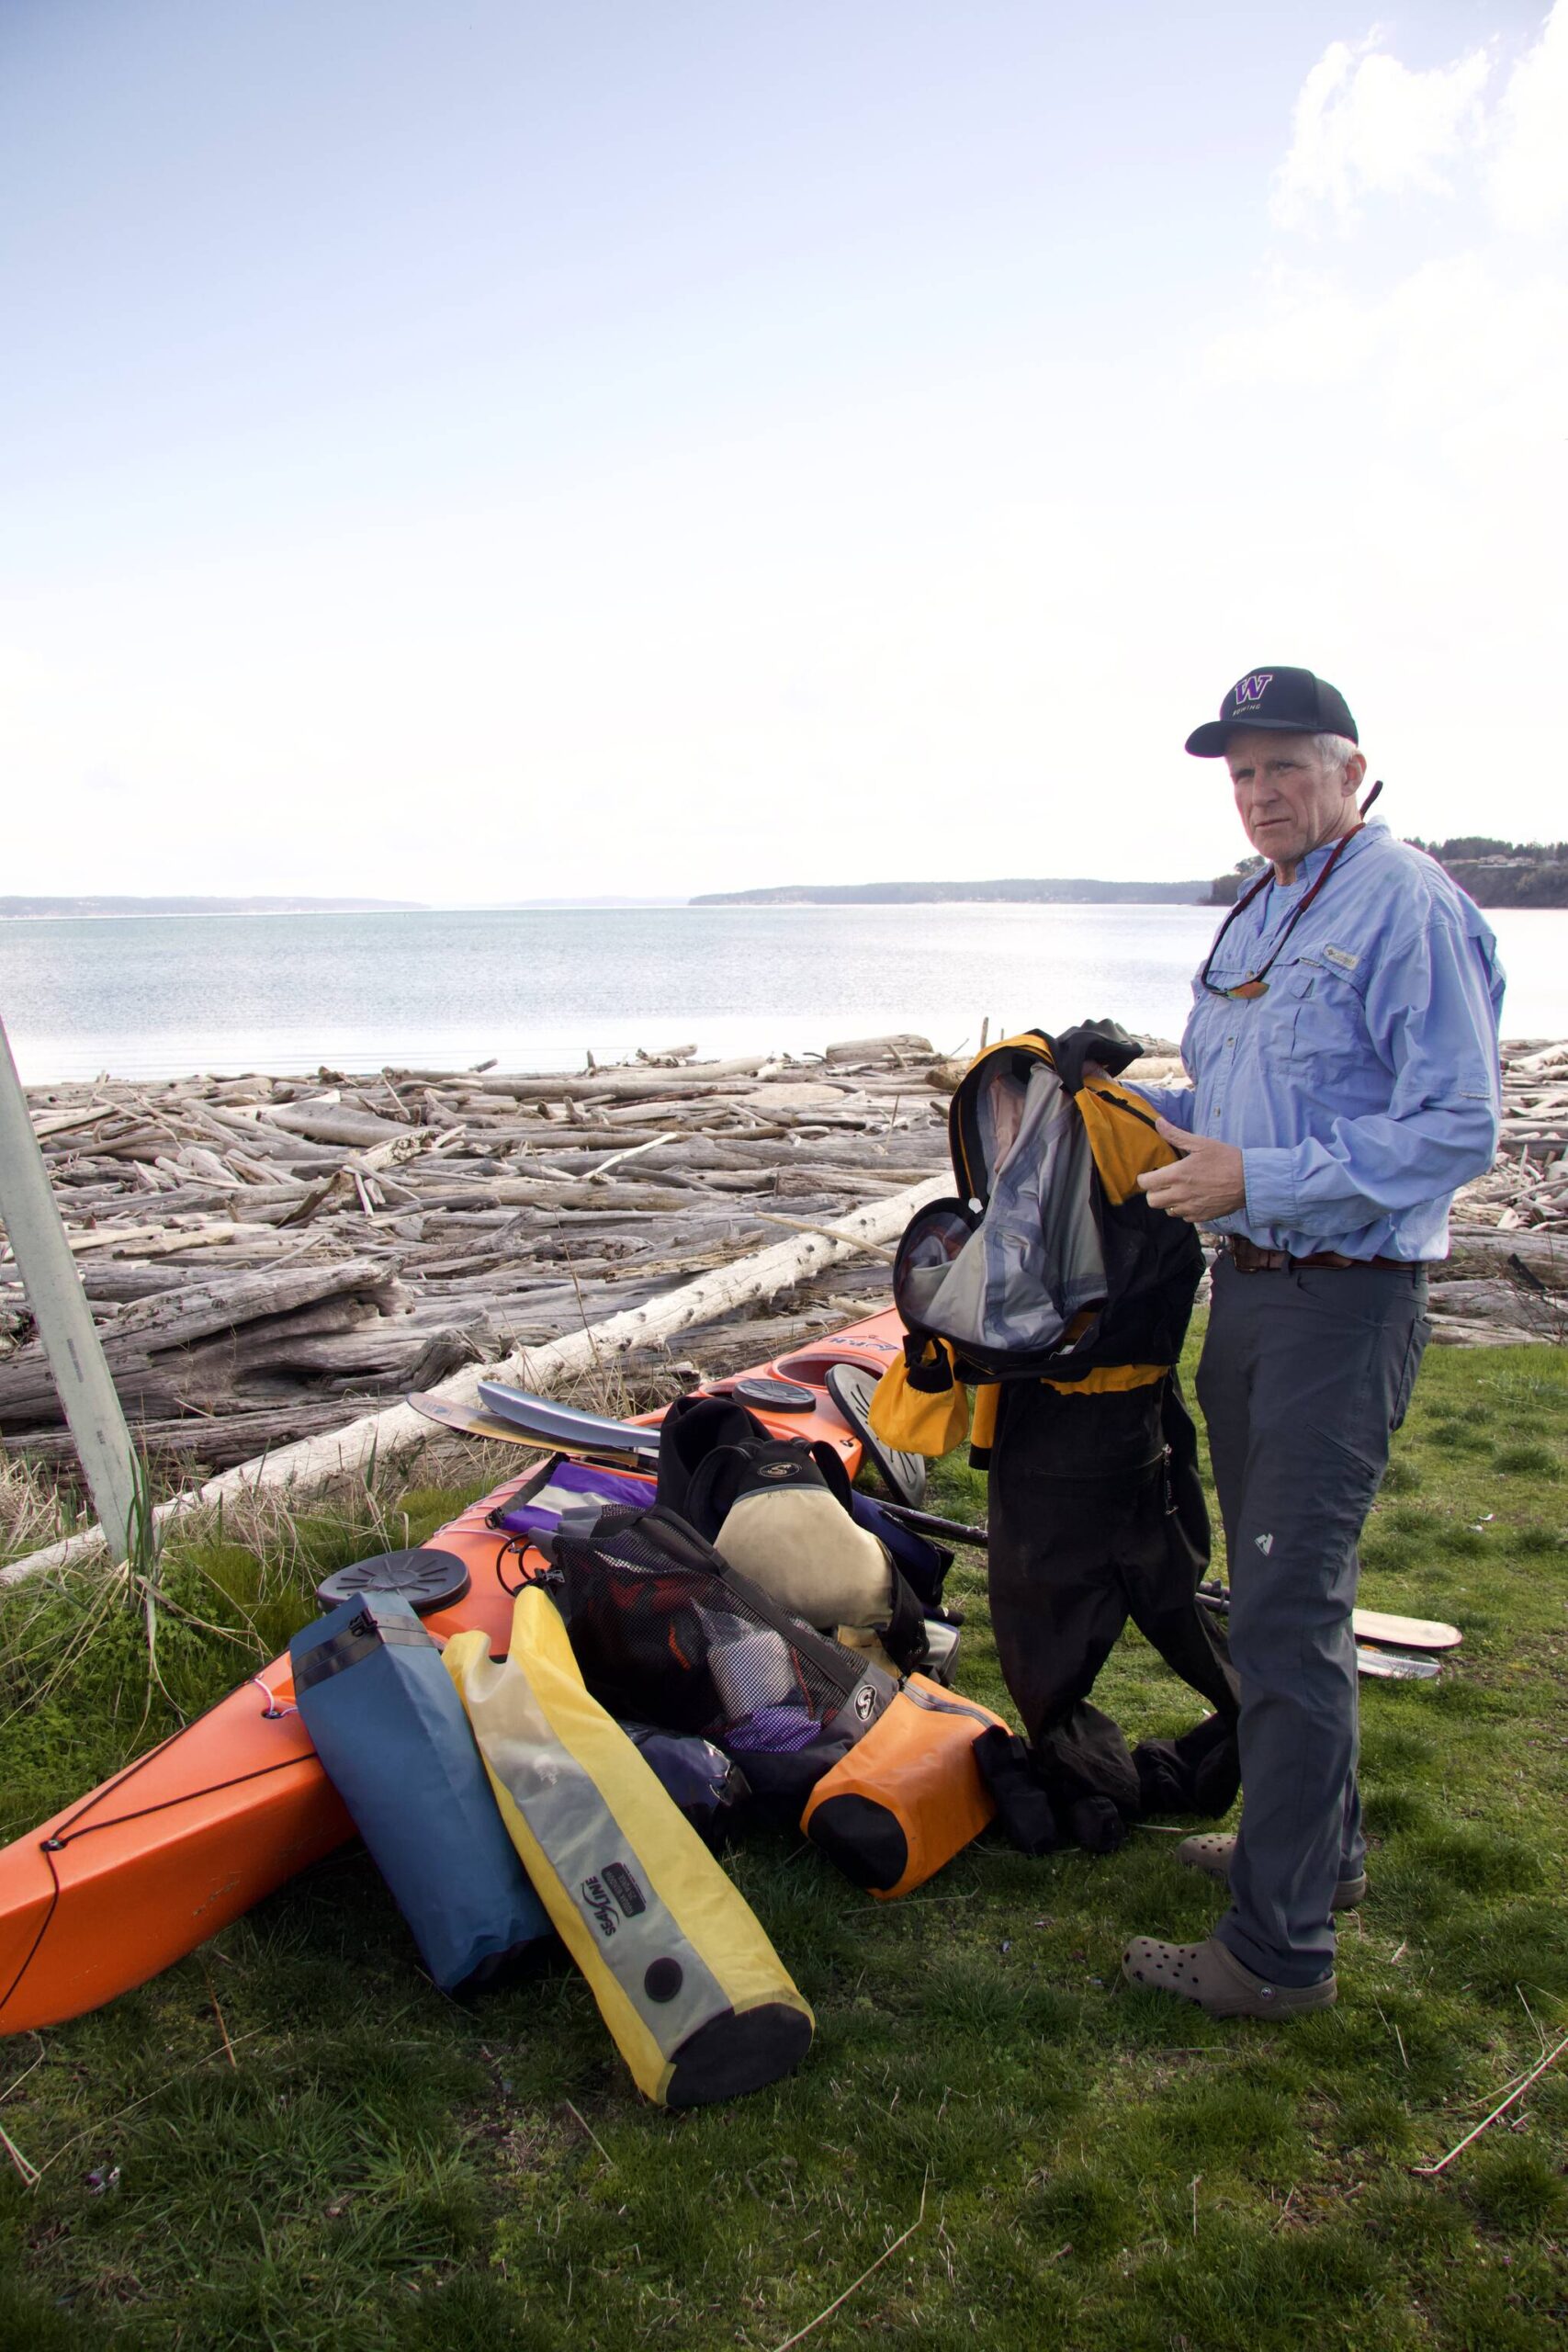 Photo by Rachel Rosen/Whidbey News-Times
Bill Walker explains the gear needed to go kayak camping.